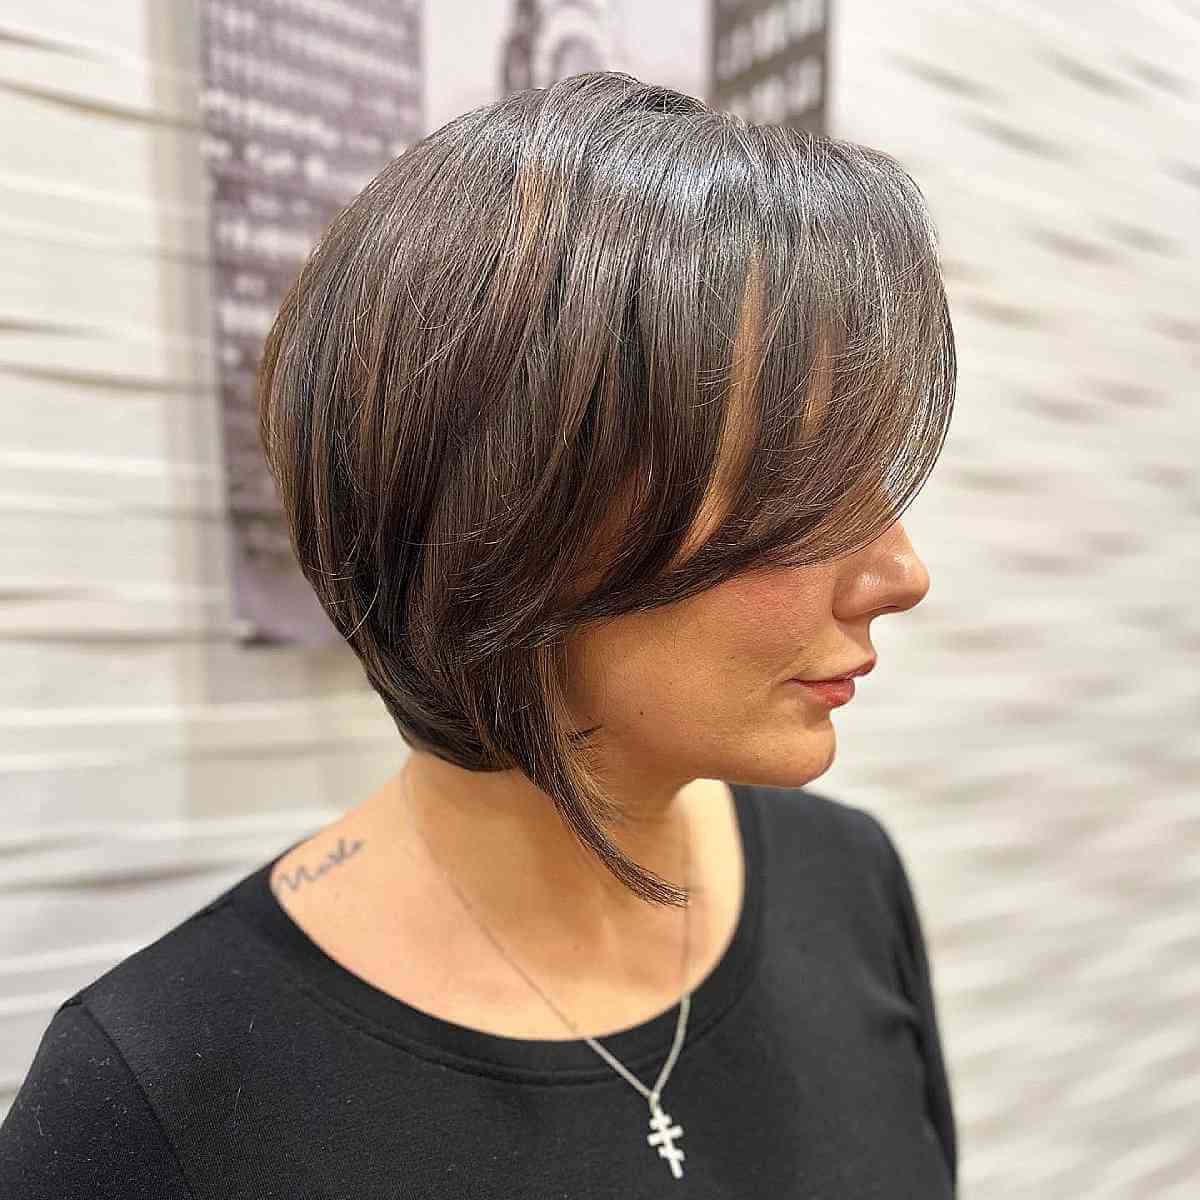 High Short-Stacked Swing Bobs